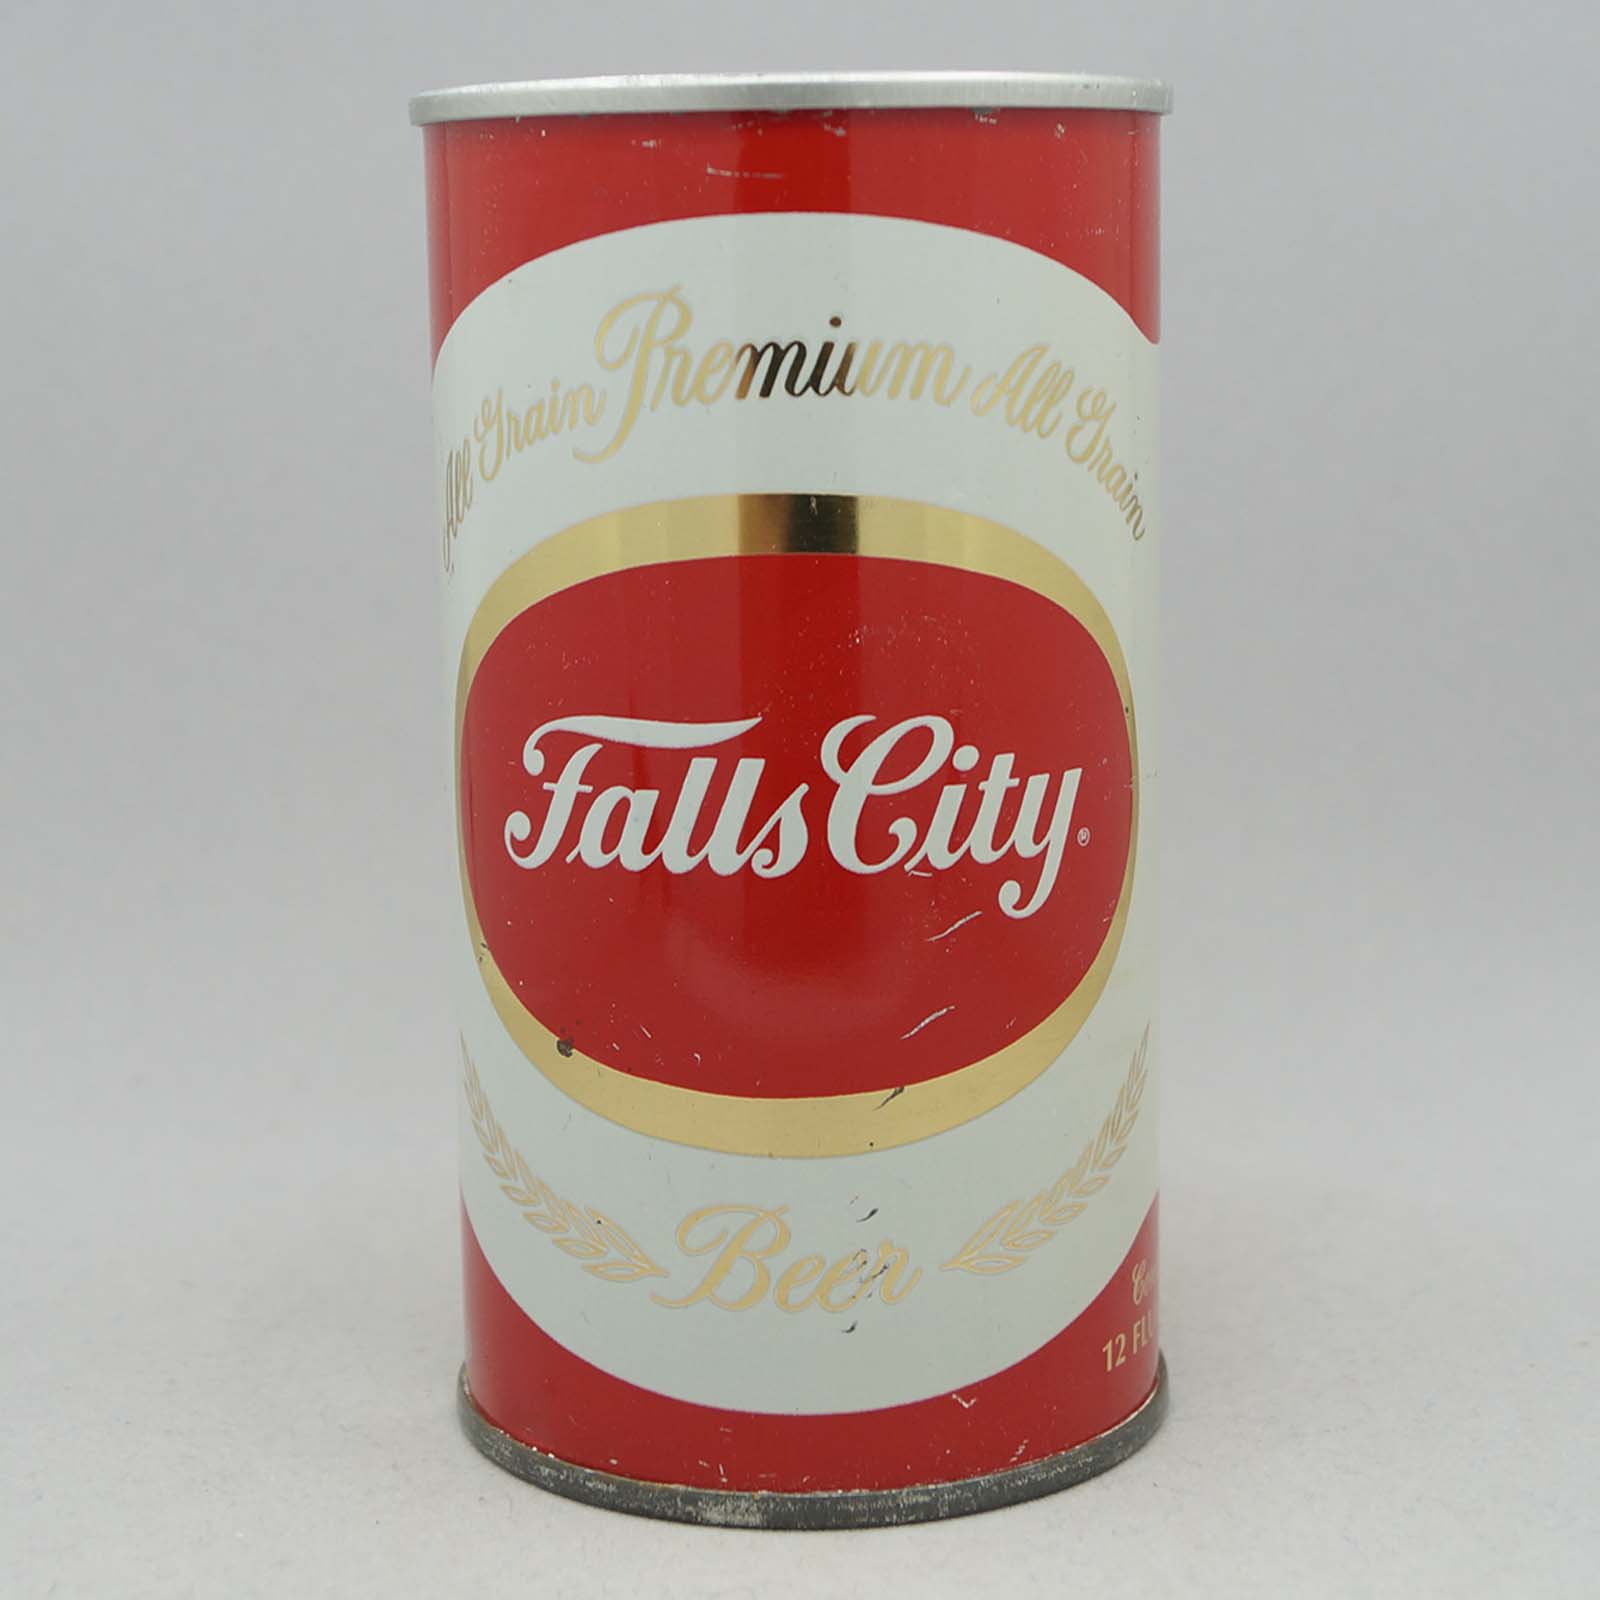 falls city 62-13 pull tab beer can 1